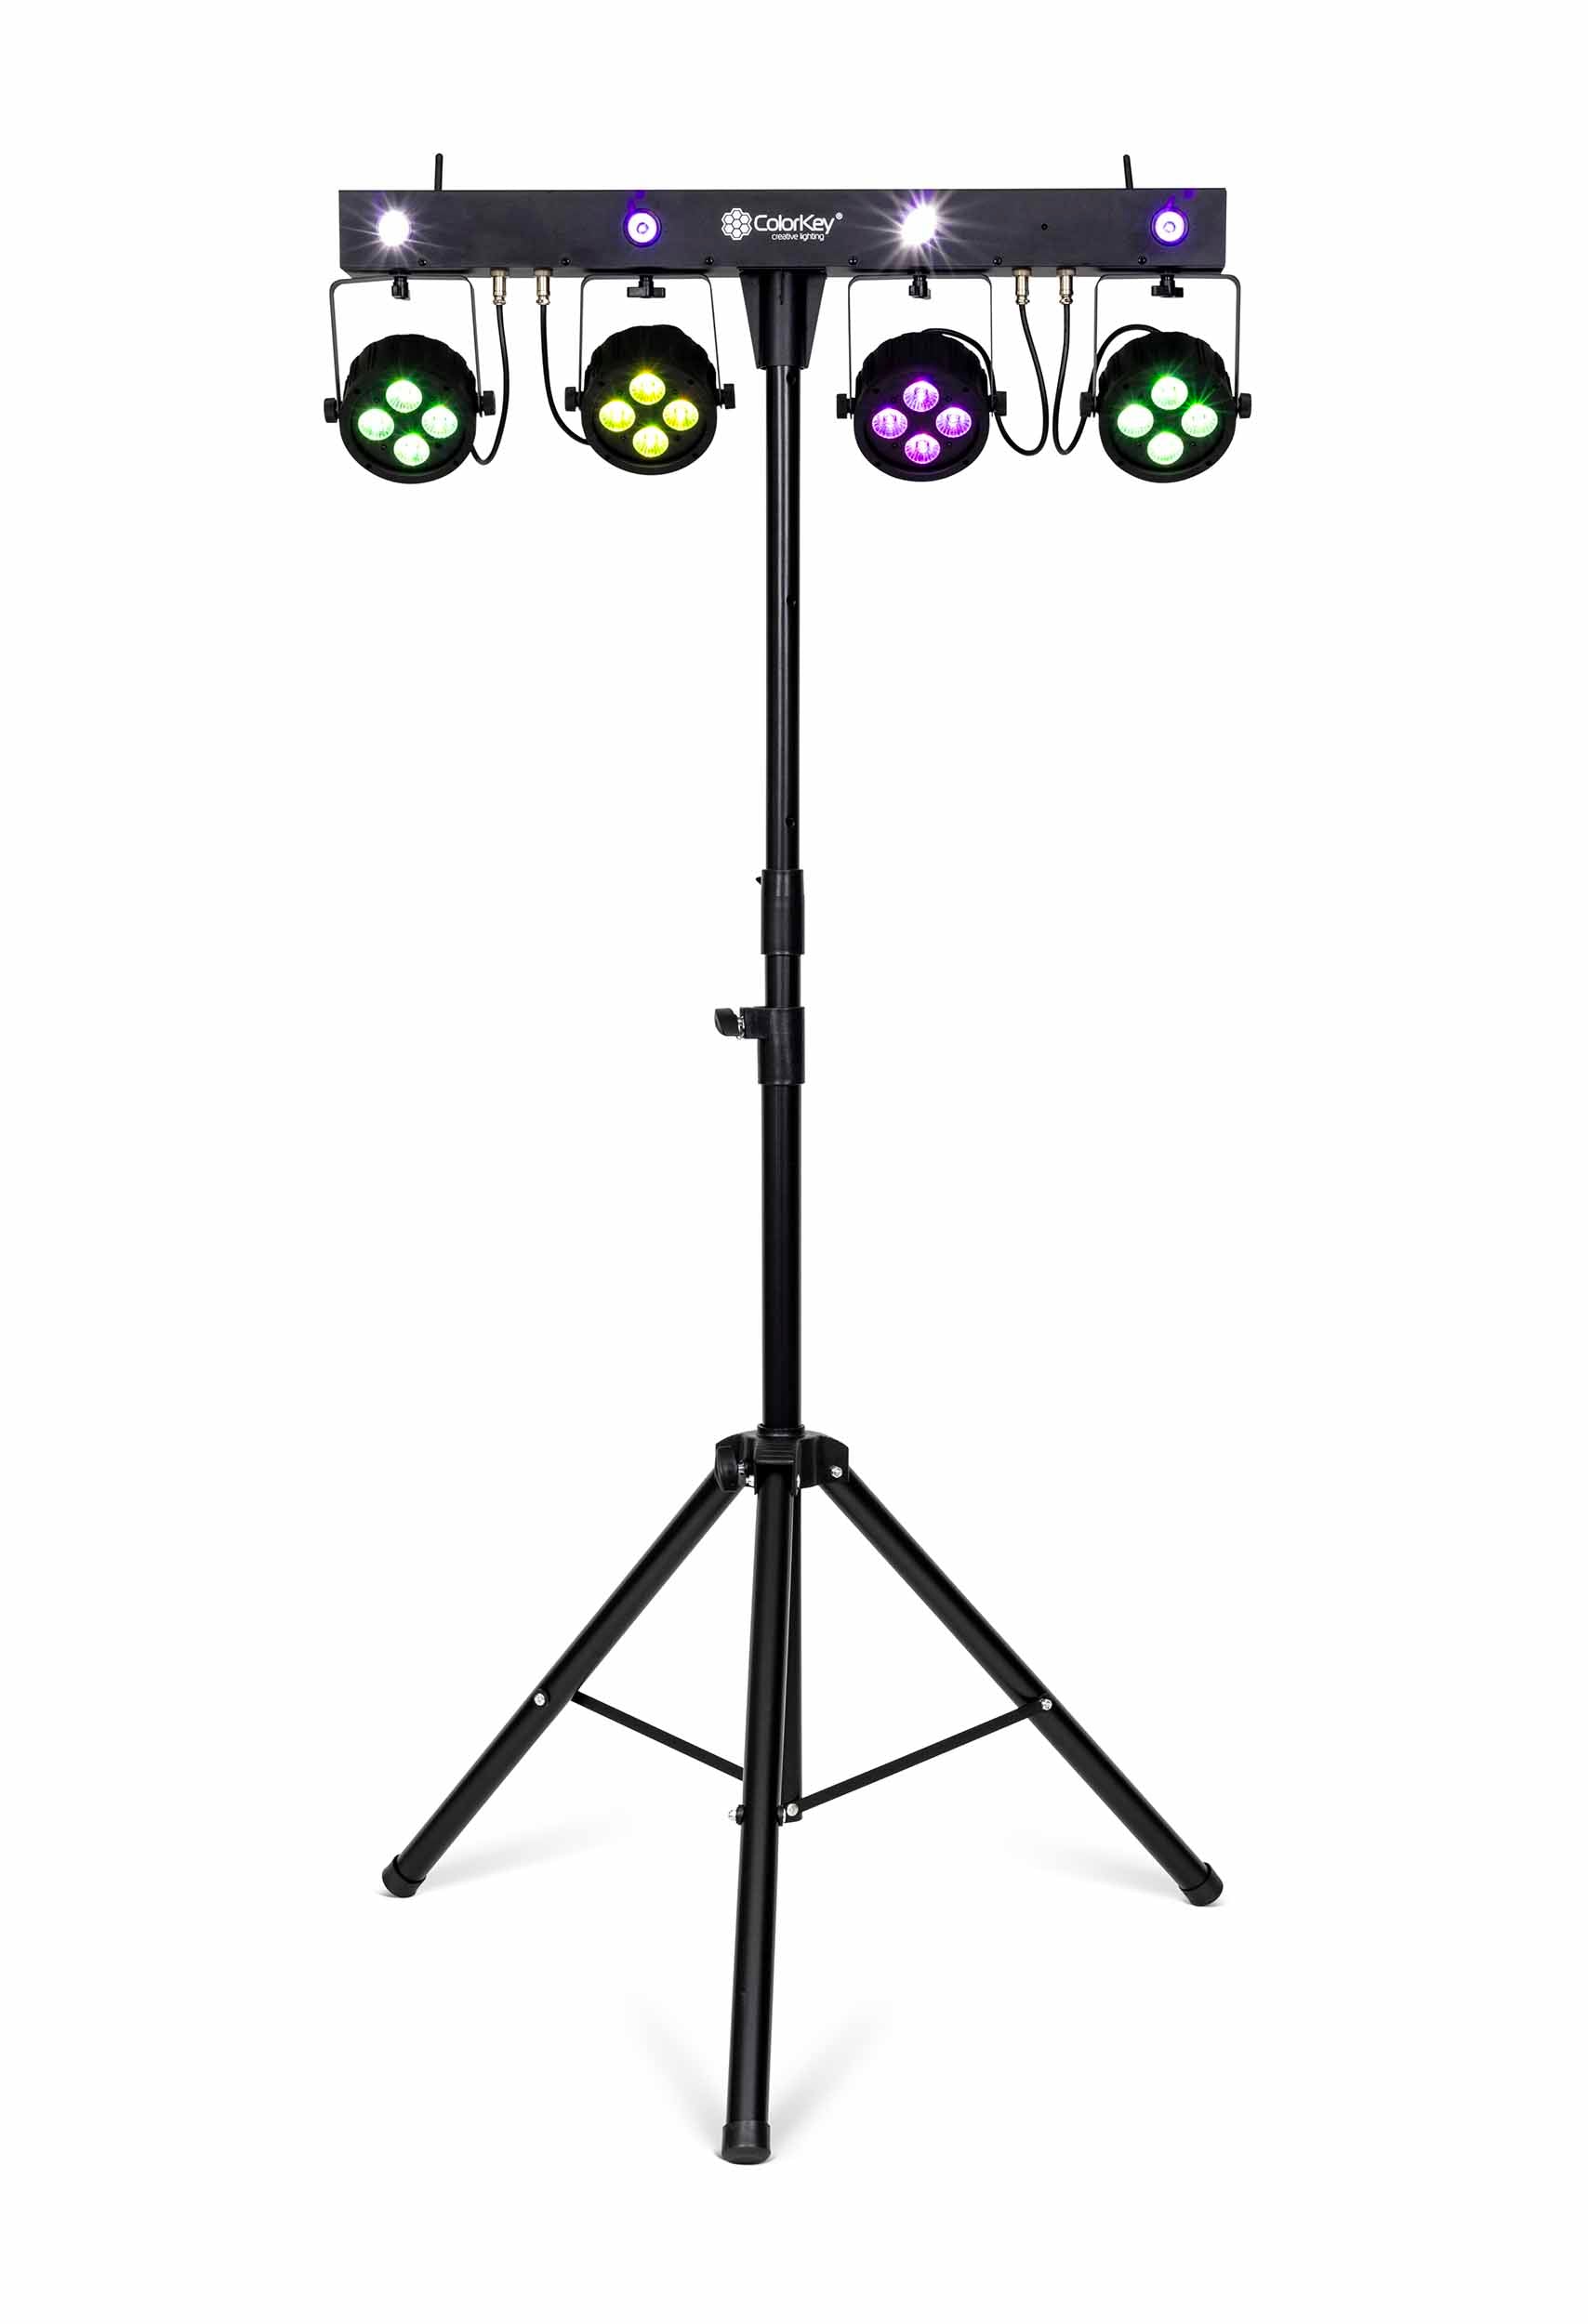 Colorkey CKU-3060, Battery-Powered Lighting Package with Stand and Carrying Case by ColorKey